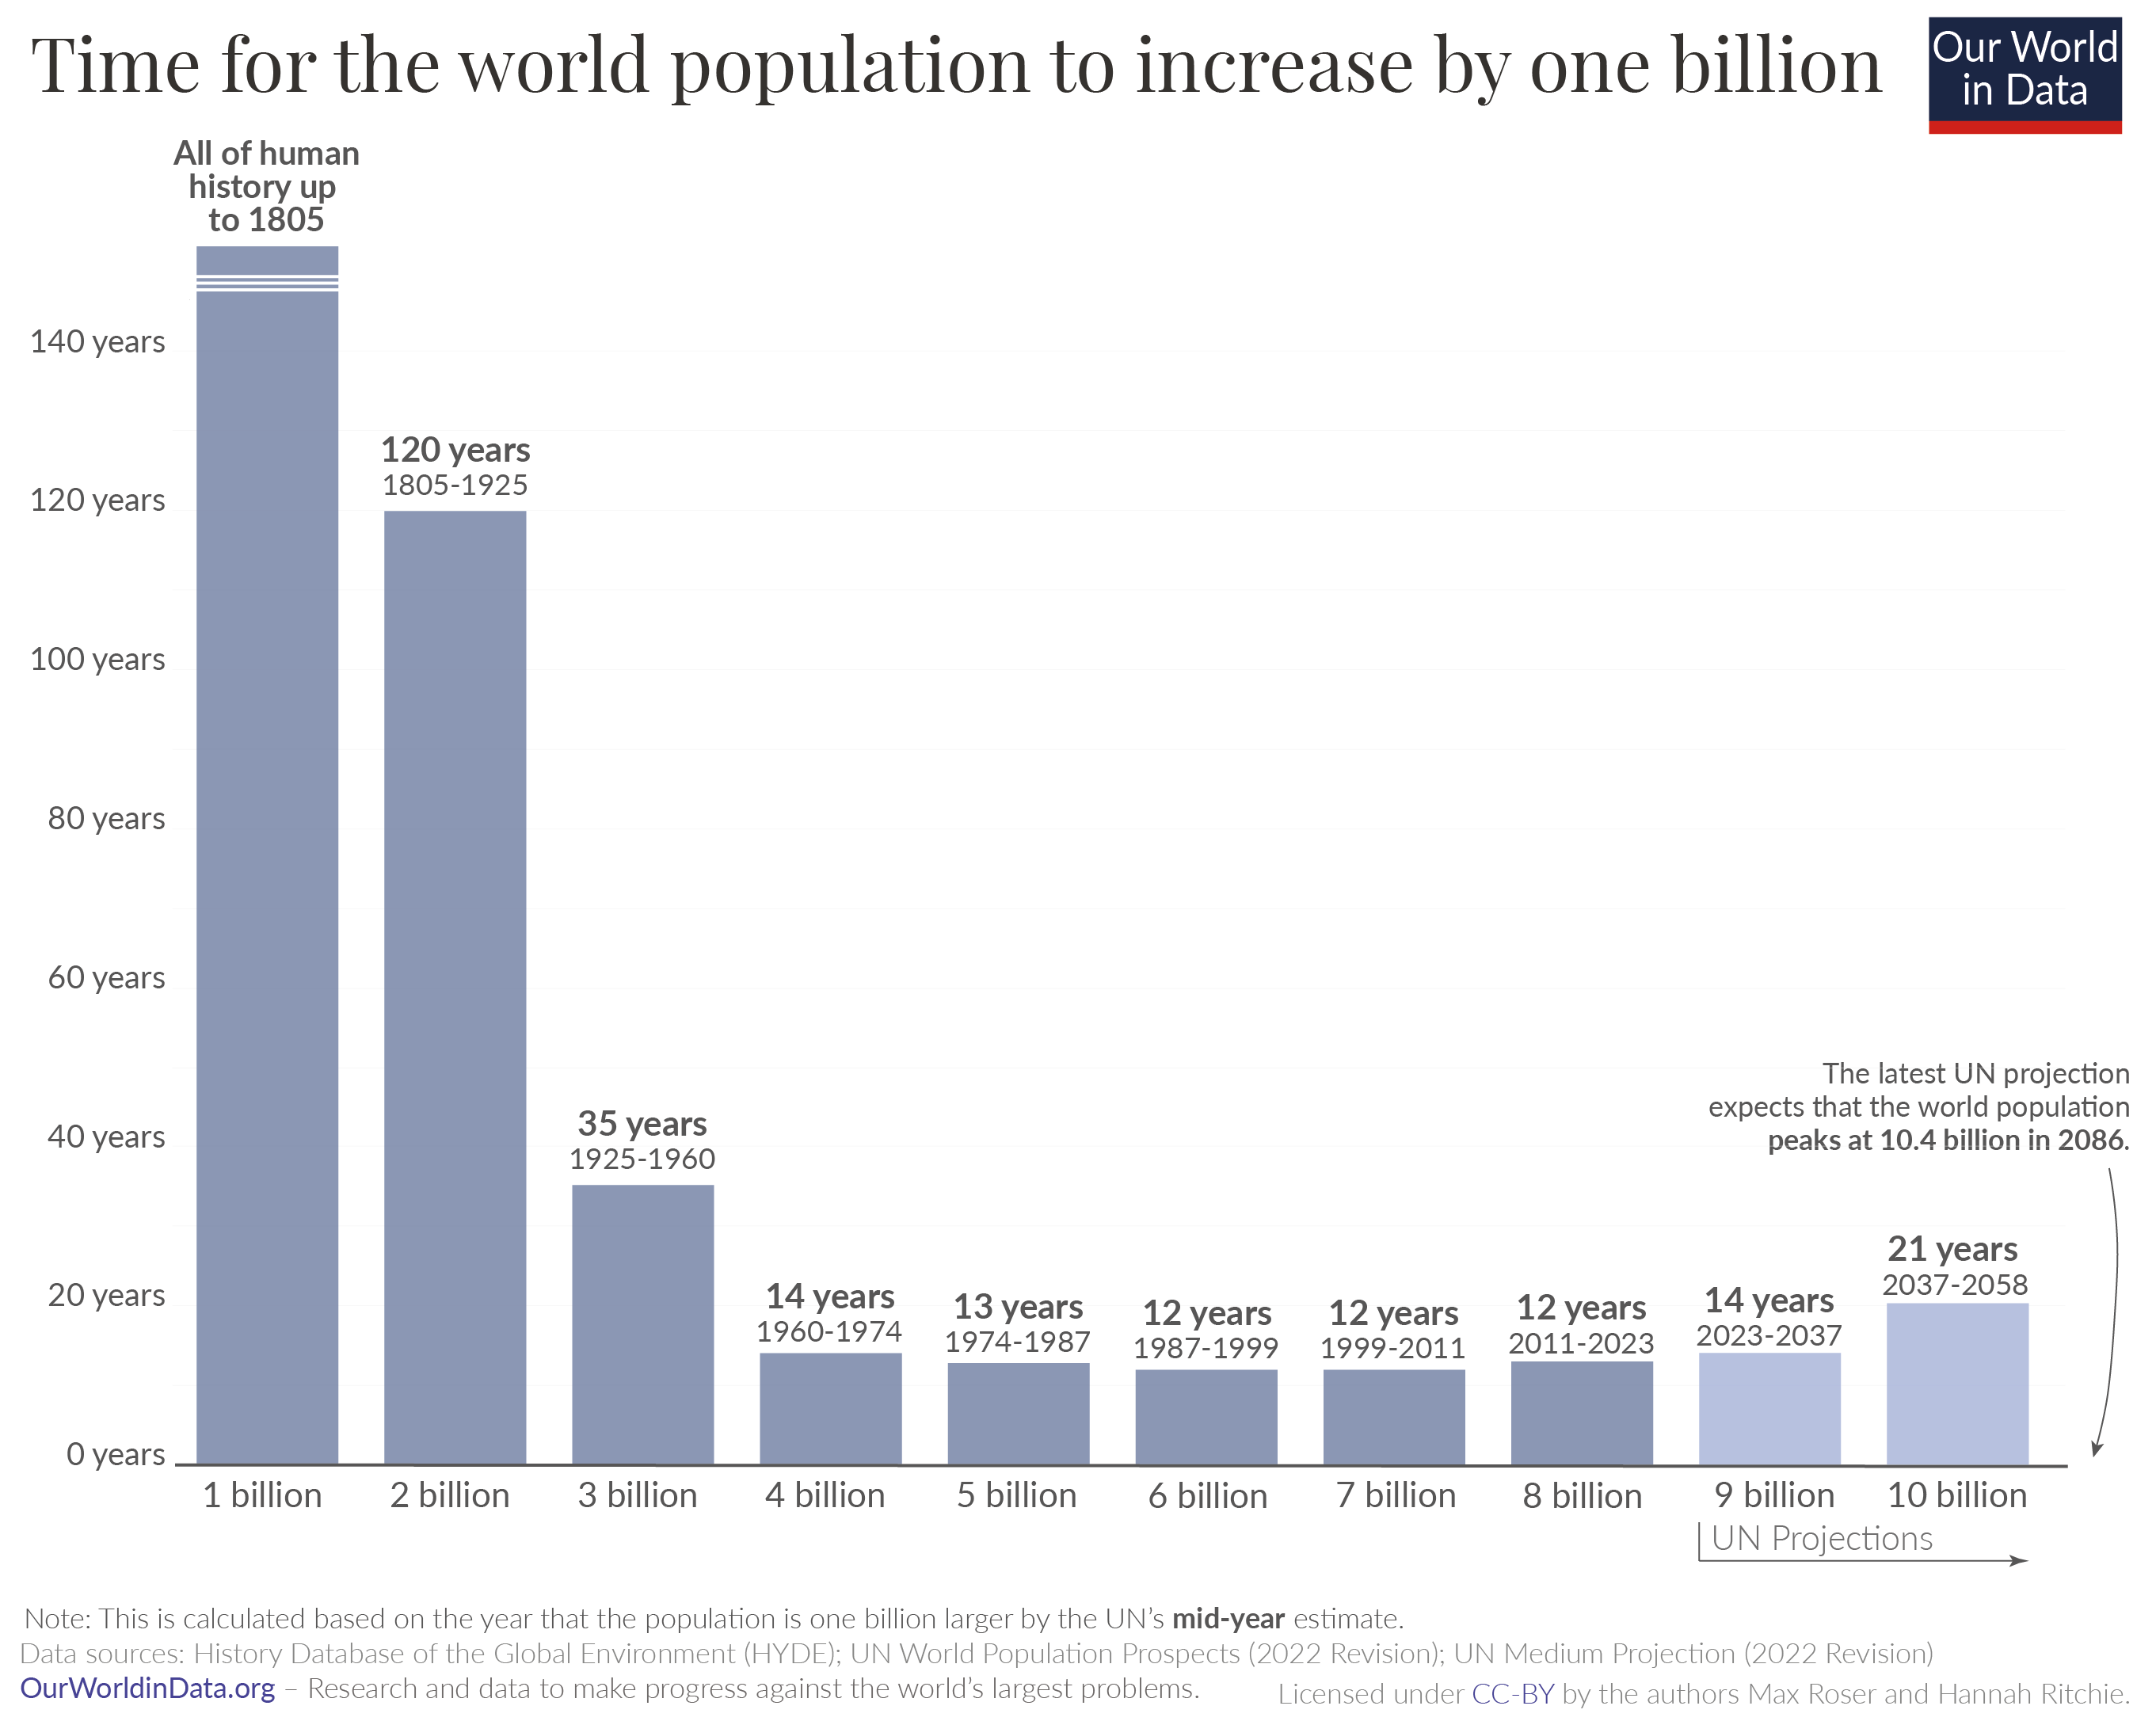 Time taken to increase population by one billion